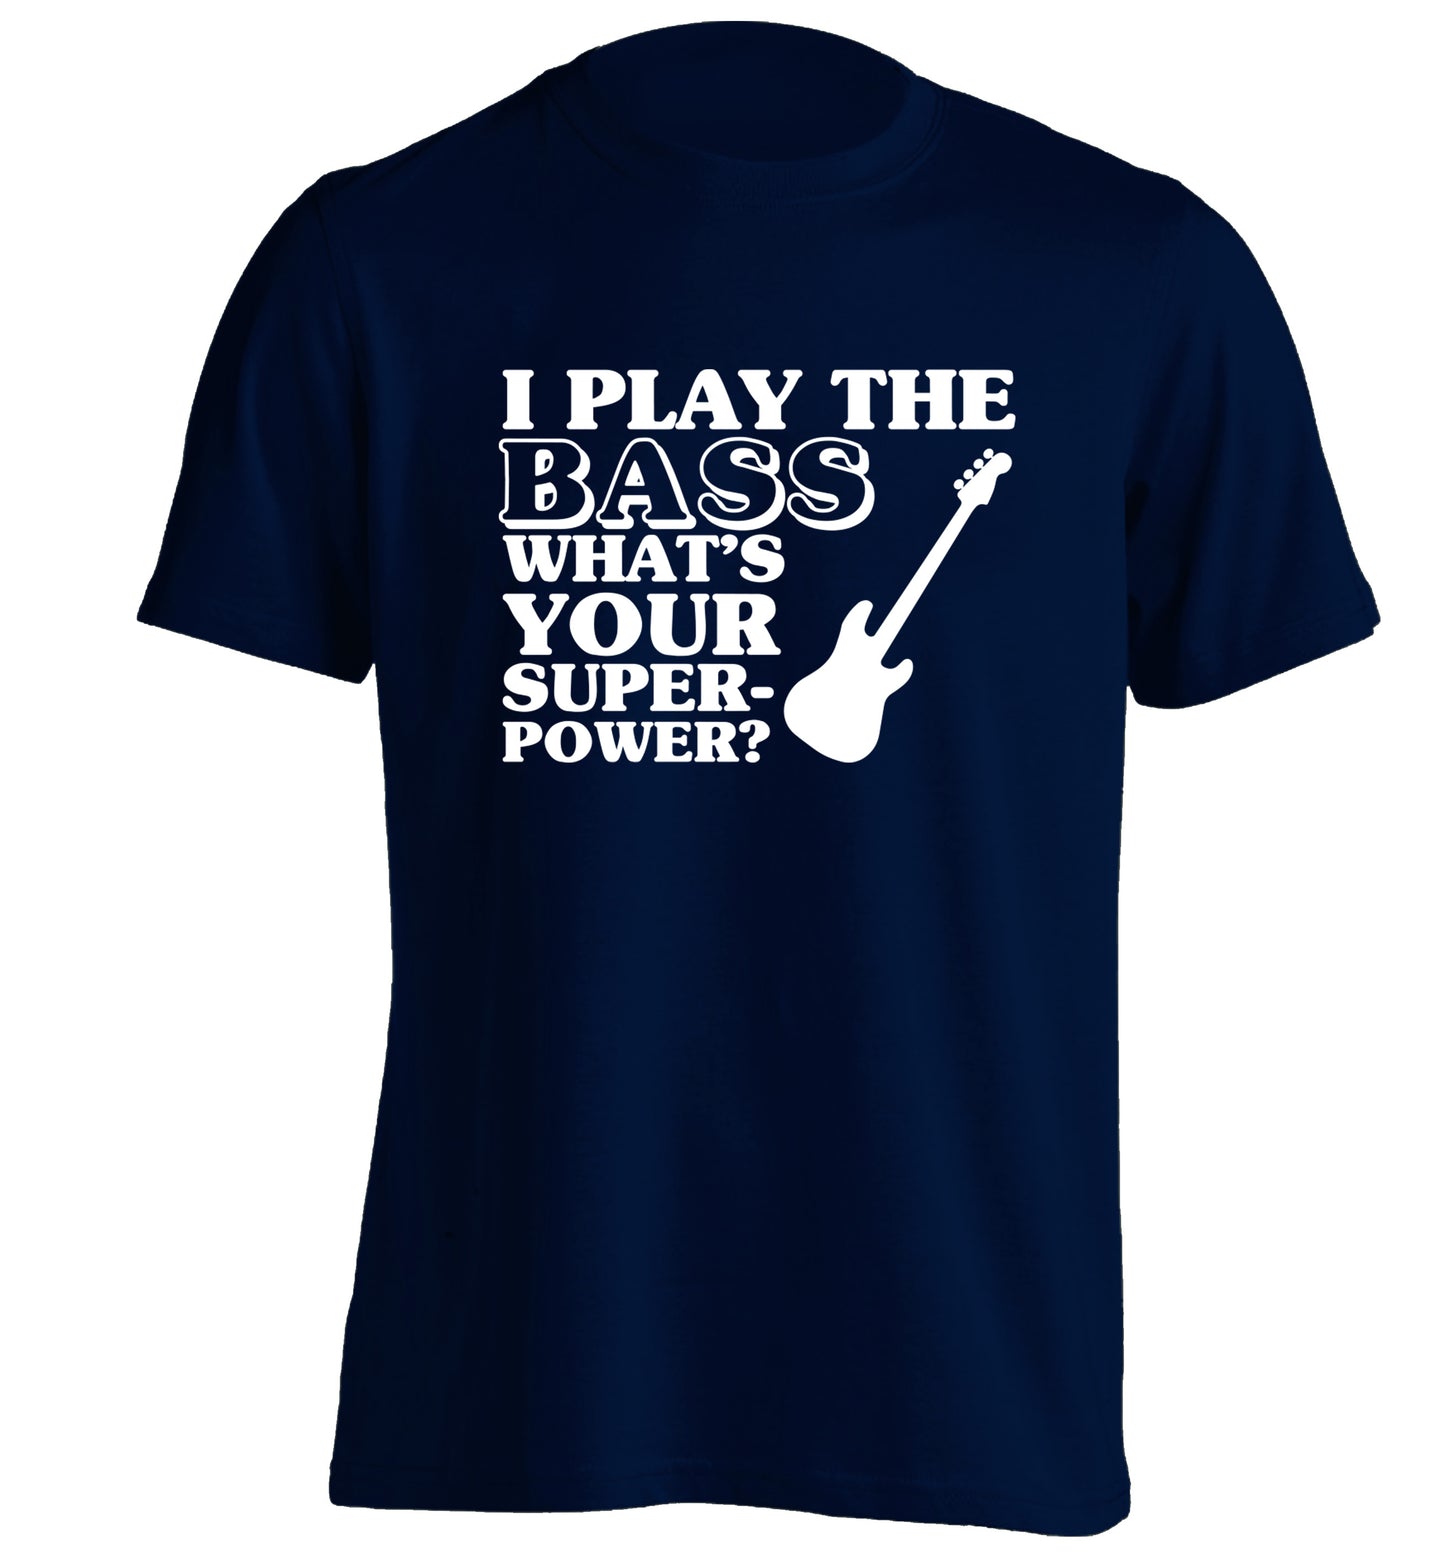 I play the bass what's your superpower? adults unisex navy Tshirt 2XL